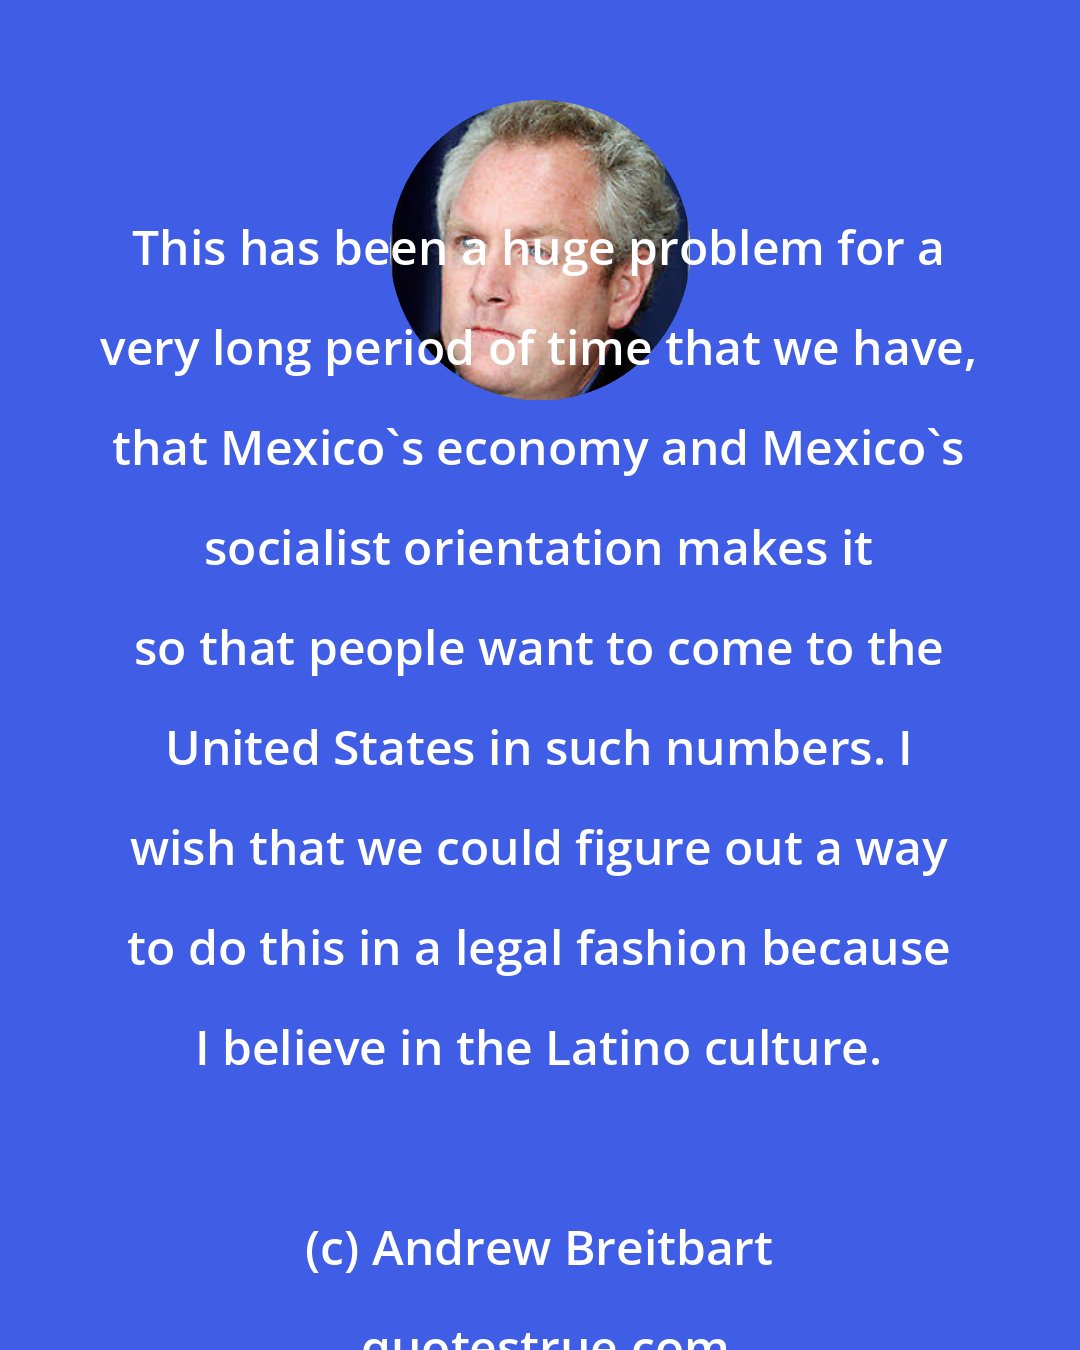 Andrew Breitbart: This has been a huge problem for a very long period of time that we have, that Mexico's economy and Mexico's socialist orientation makes it so that people want to come to the United States in such numbers. I wish that we could figure out a way to do this in a legal fashion because I believe in the Latino culture.